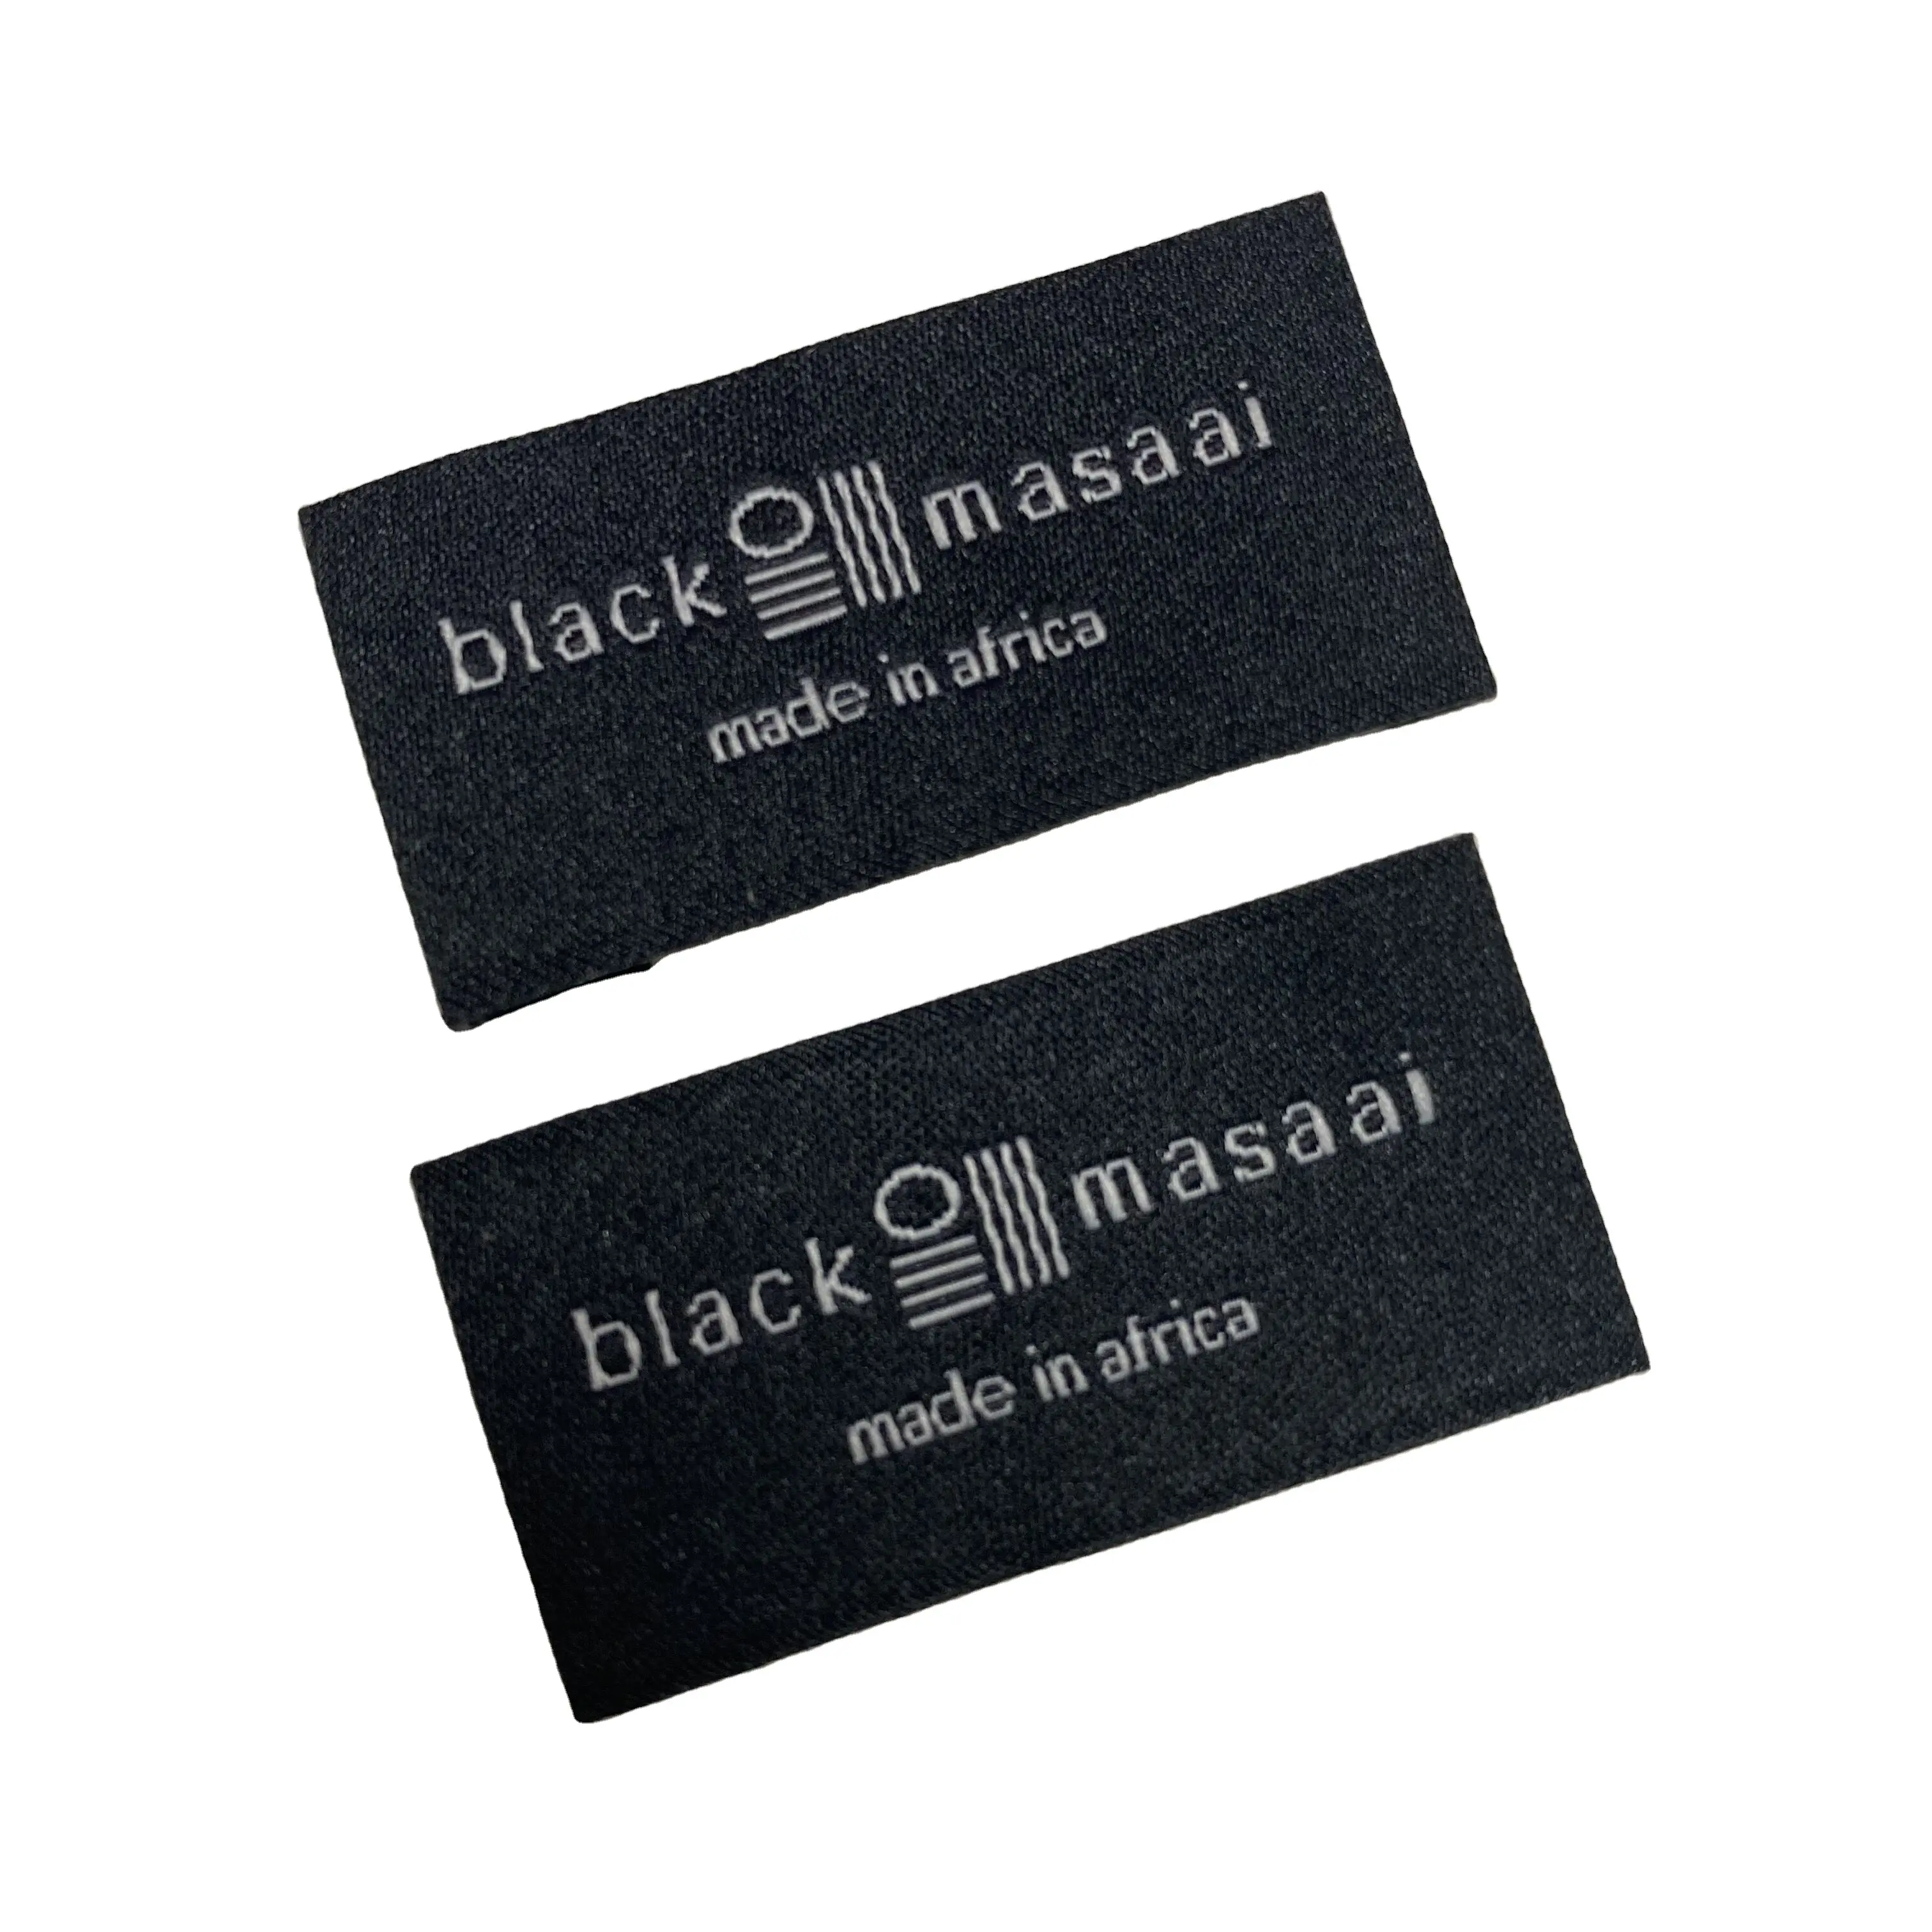 Clothing Accessories Private Brand Name Logo Damask Woven Tag Garment Cloth Label Custom Woven Label for Clothing